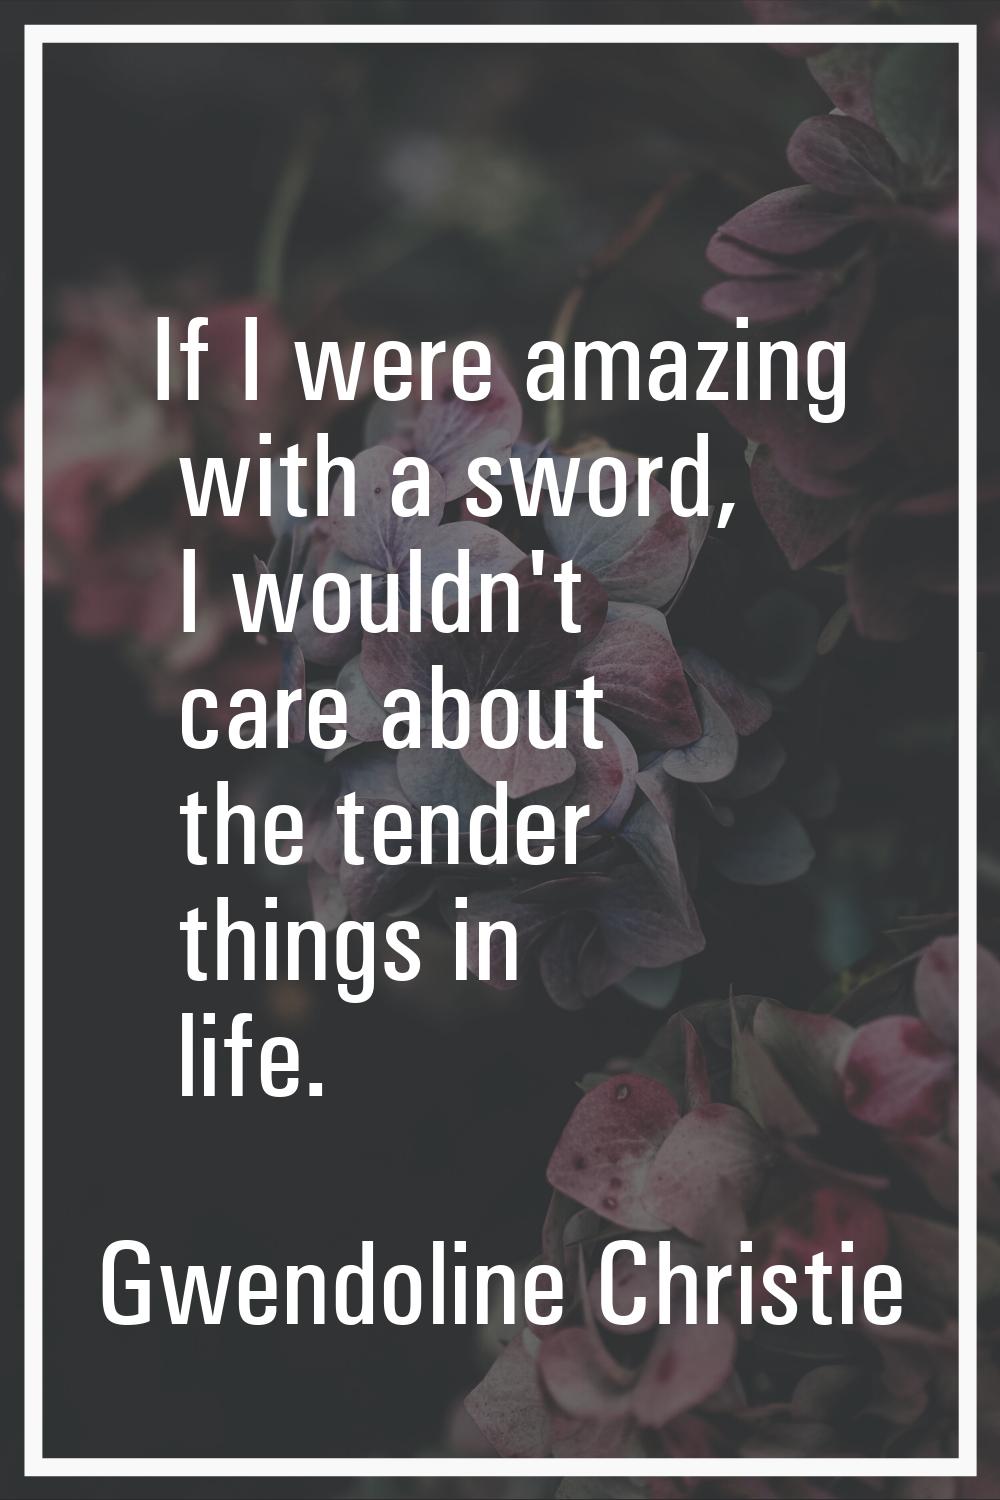 If I were amazing with a sword, I wouldn't care about the tender things in life.